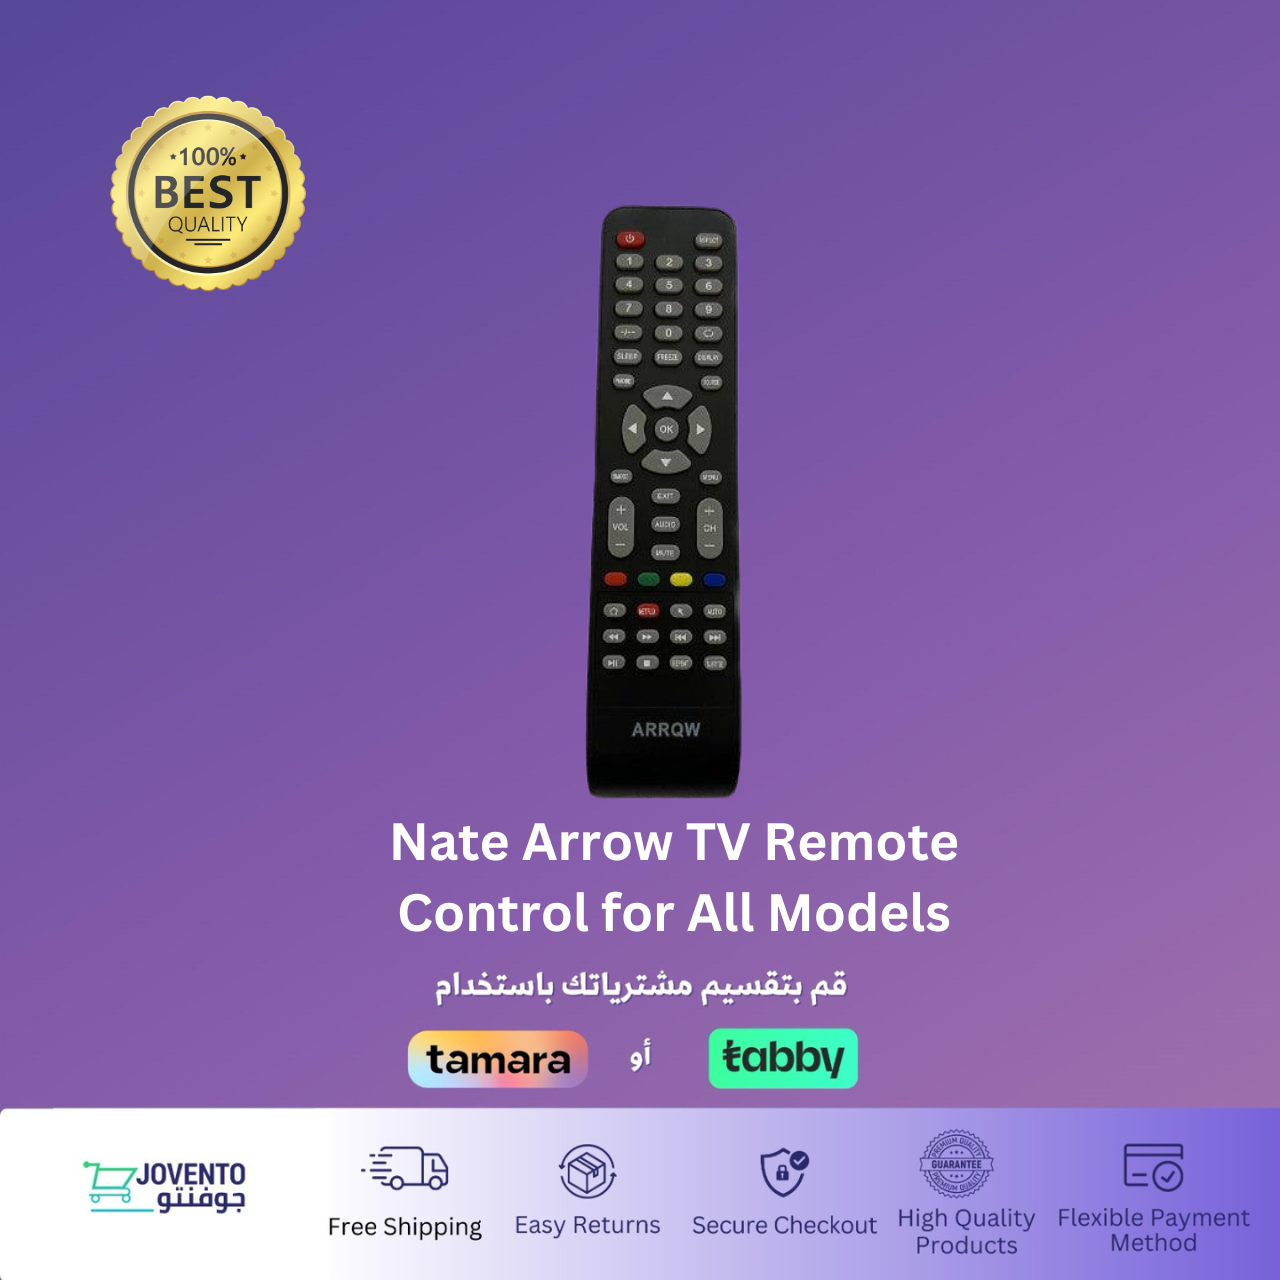 Nate Arrow TV Remote Control for All Models